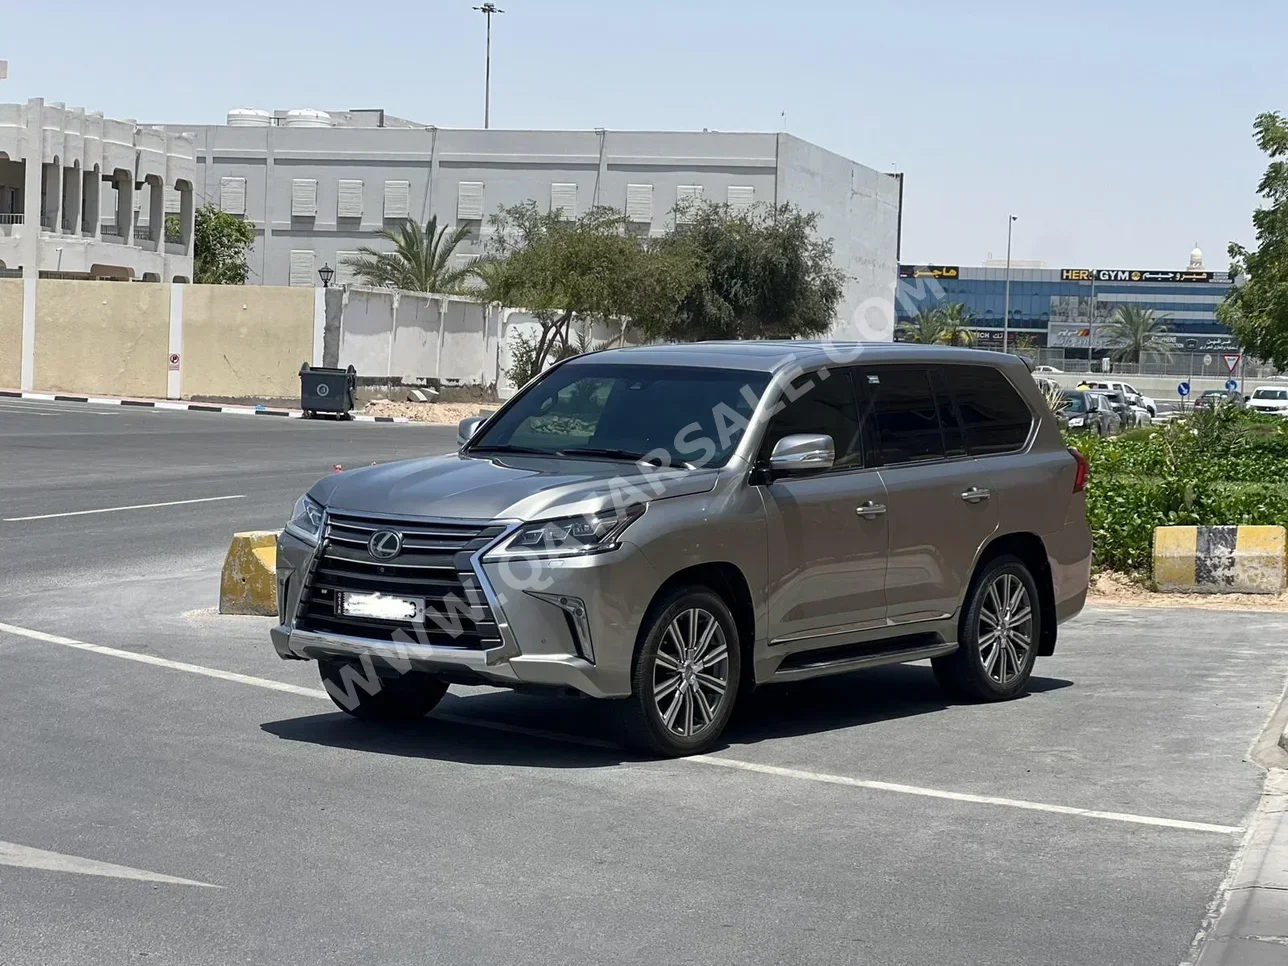 Lexus  LX  570 S  2017  Automatic  60,000 Km  8 Cylinder  Four Wheel Drive (4WD)  SUV  Gold